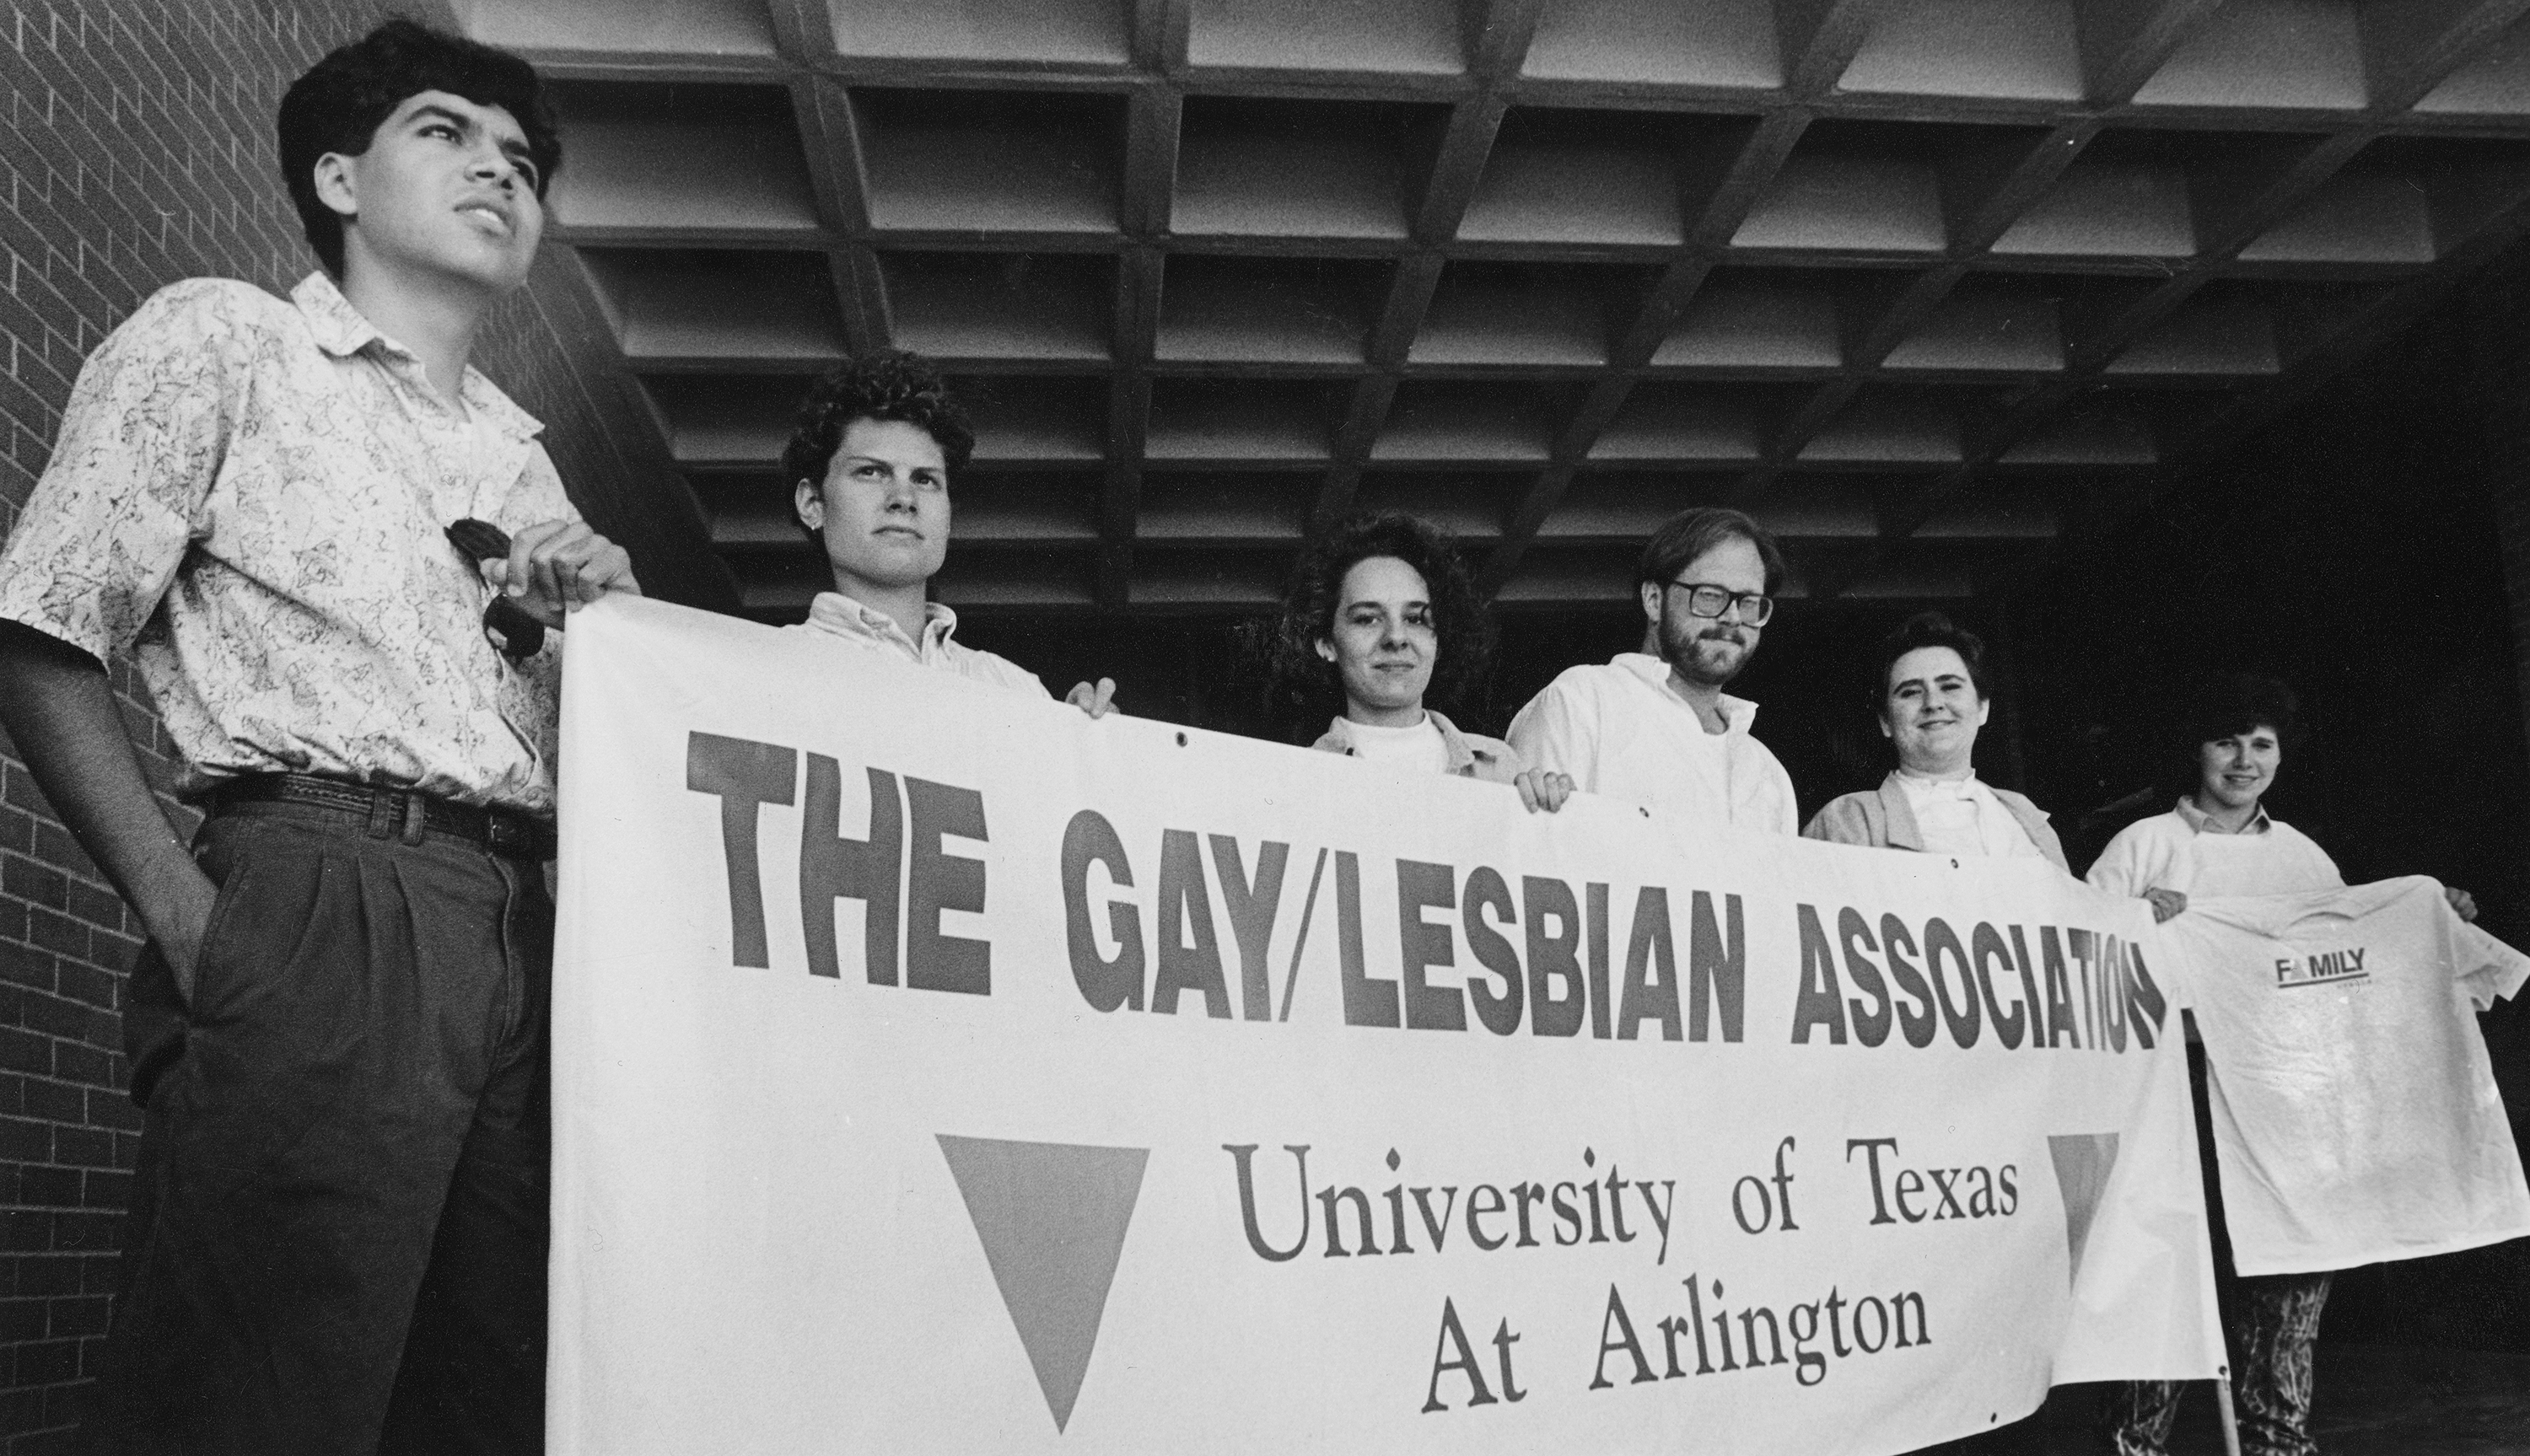 The Gay/Lesbian Association (GLA) of the University of Texas at Arlington members posed for a portrait, holding their banner. A member at the far right is holding a shirt reading "Family." The GLA was preparing to march in the upcoming "March on Austin for Lesbian-Gay Equal Rights," to be held on March 17, 1991, with their banner.